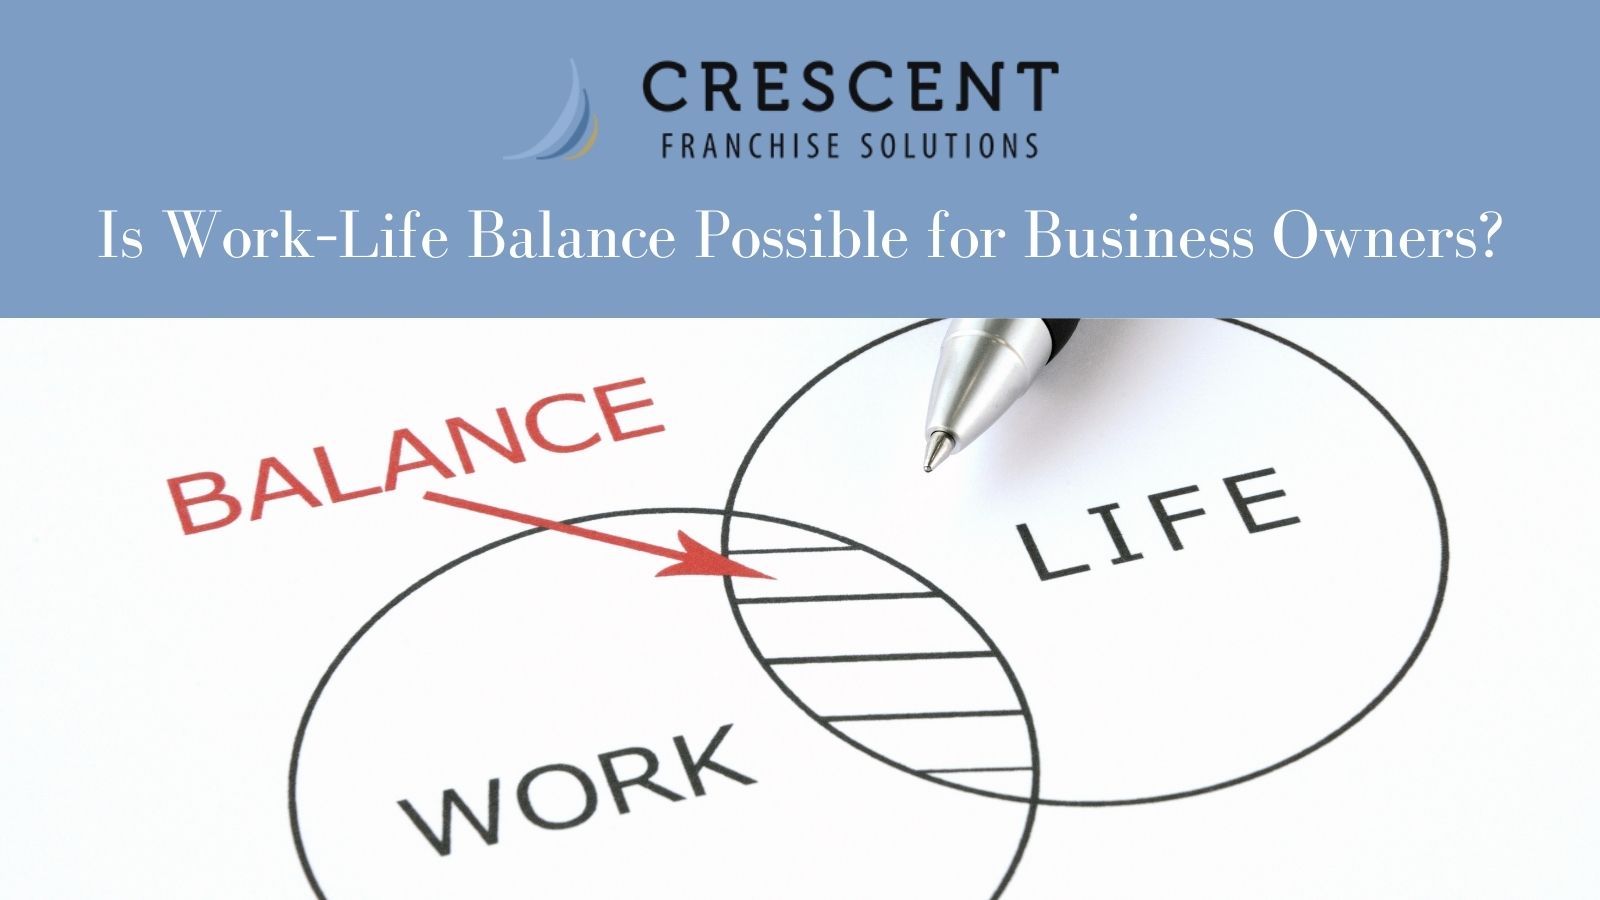 Is Work-Life Balance Possible for Business Owners?